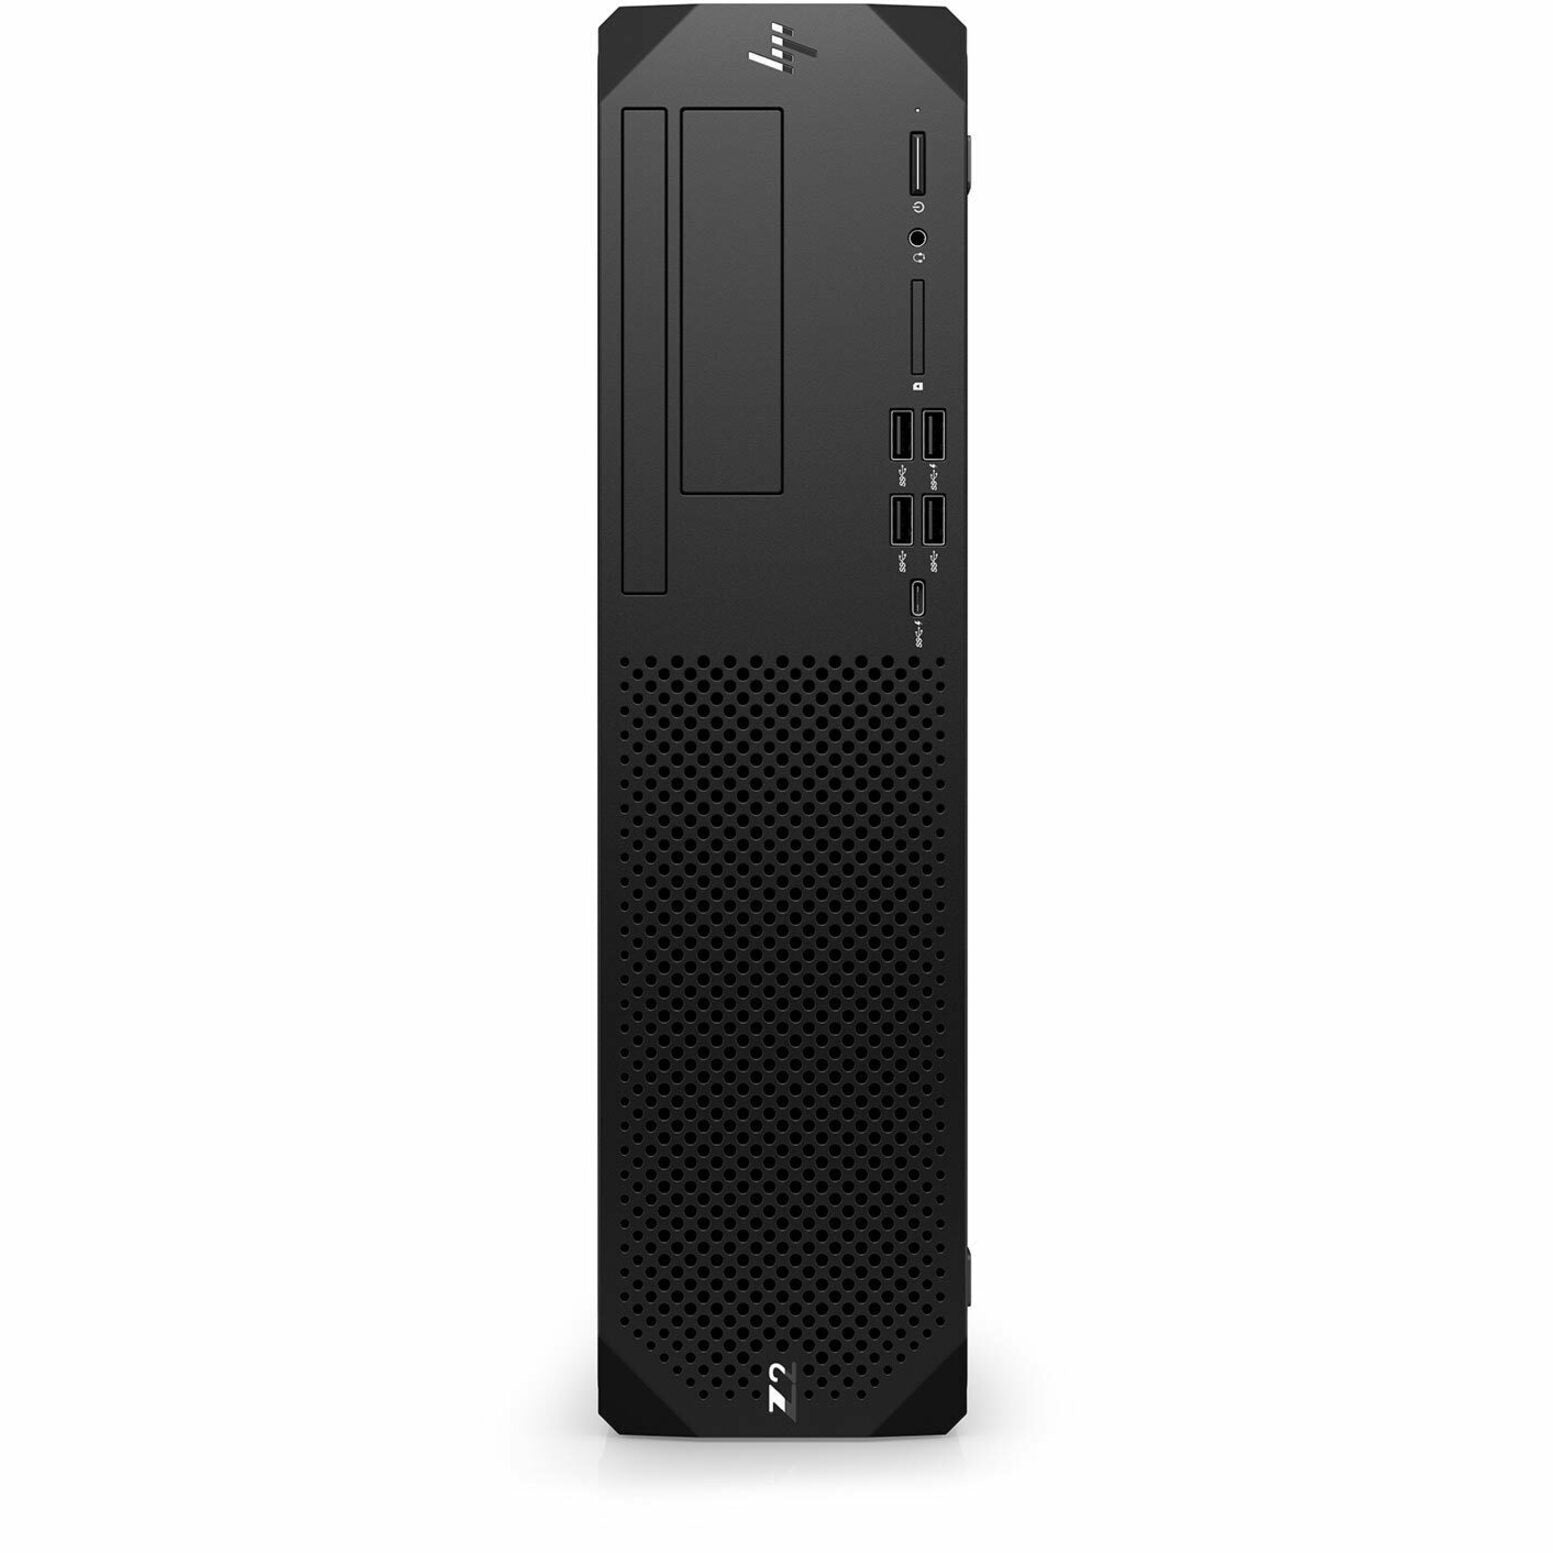 HP Z2 G9 Workstation - Intel Core i7 Dodeca-core - 32GB RAM - 1TB SSD - Small Form Factor [Discontinued]